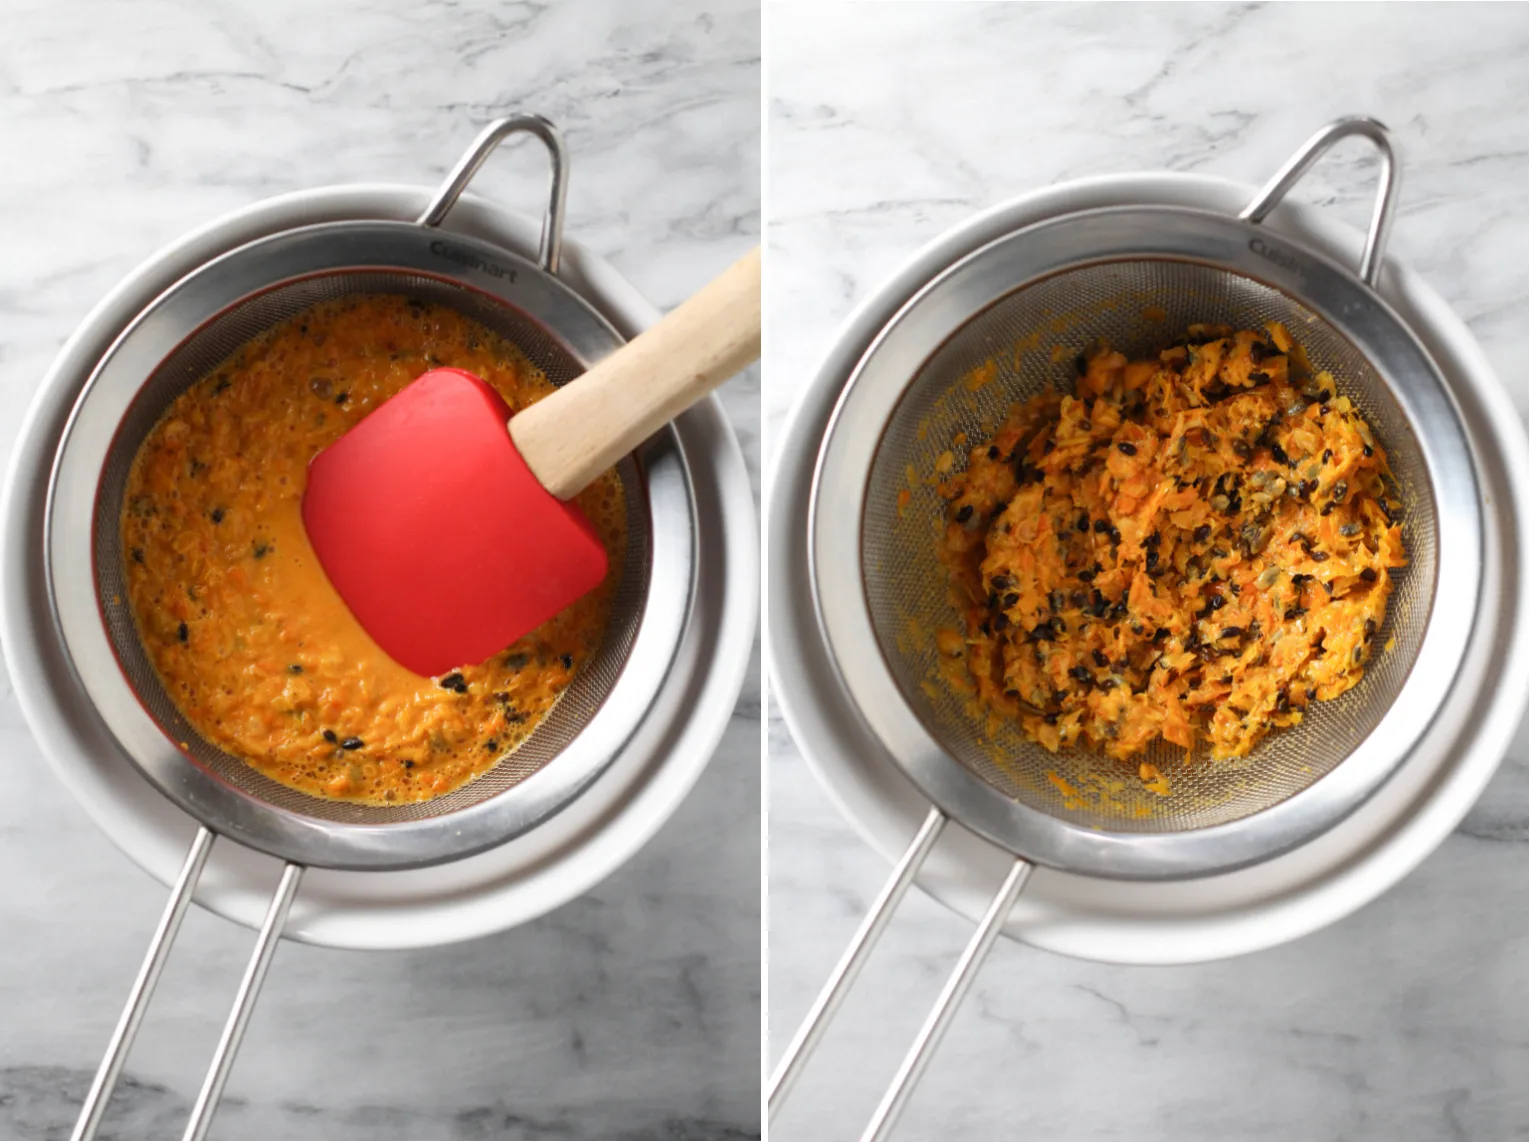 Two side-by-side images. On the left, pureed sea bbuckthorn in a fine mesh strainer placed over a bowl. A rubber spatula in the puree. On the right image, pulp from the puree in a fine mesh strainer placed over a bowl.